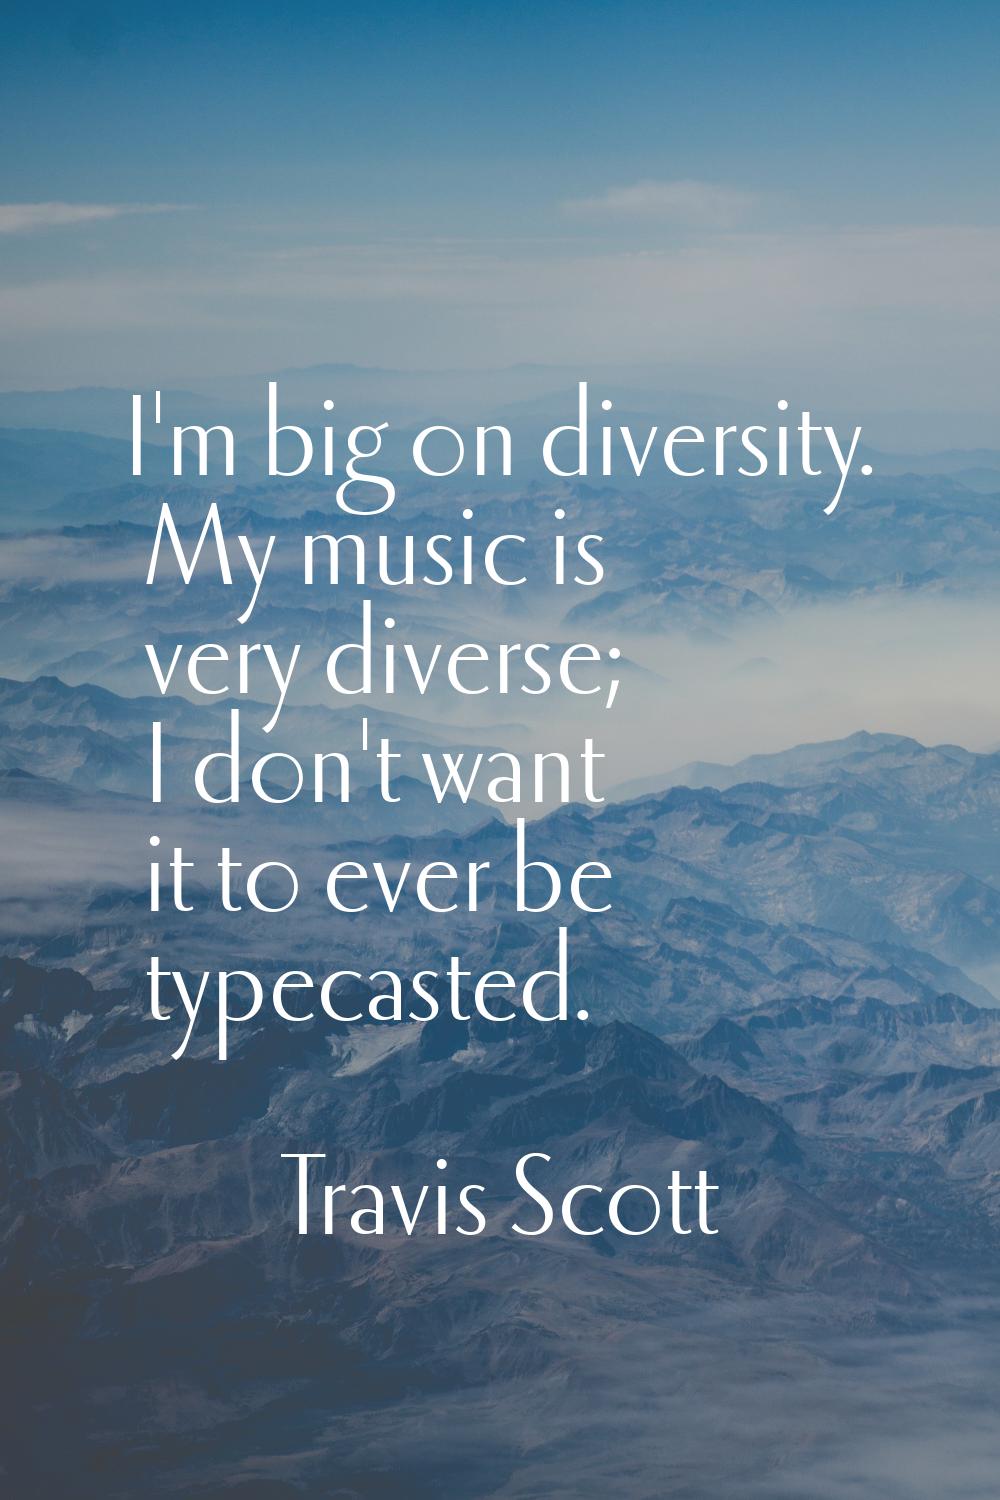 I'm big on diversity. My music is very diverse; I don't want it to ever be typecasted.